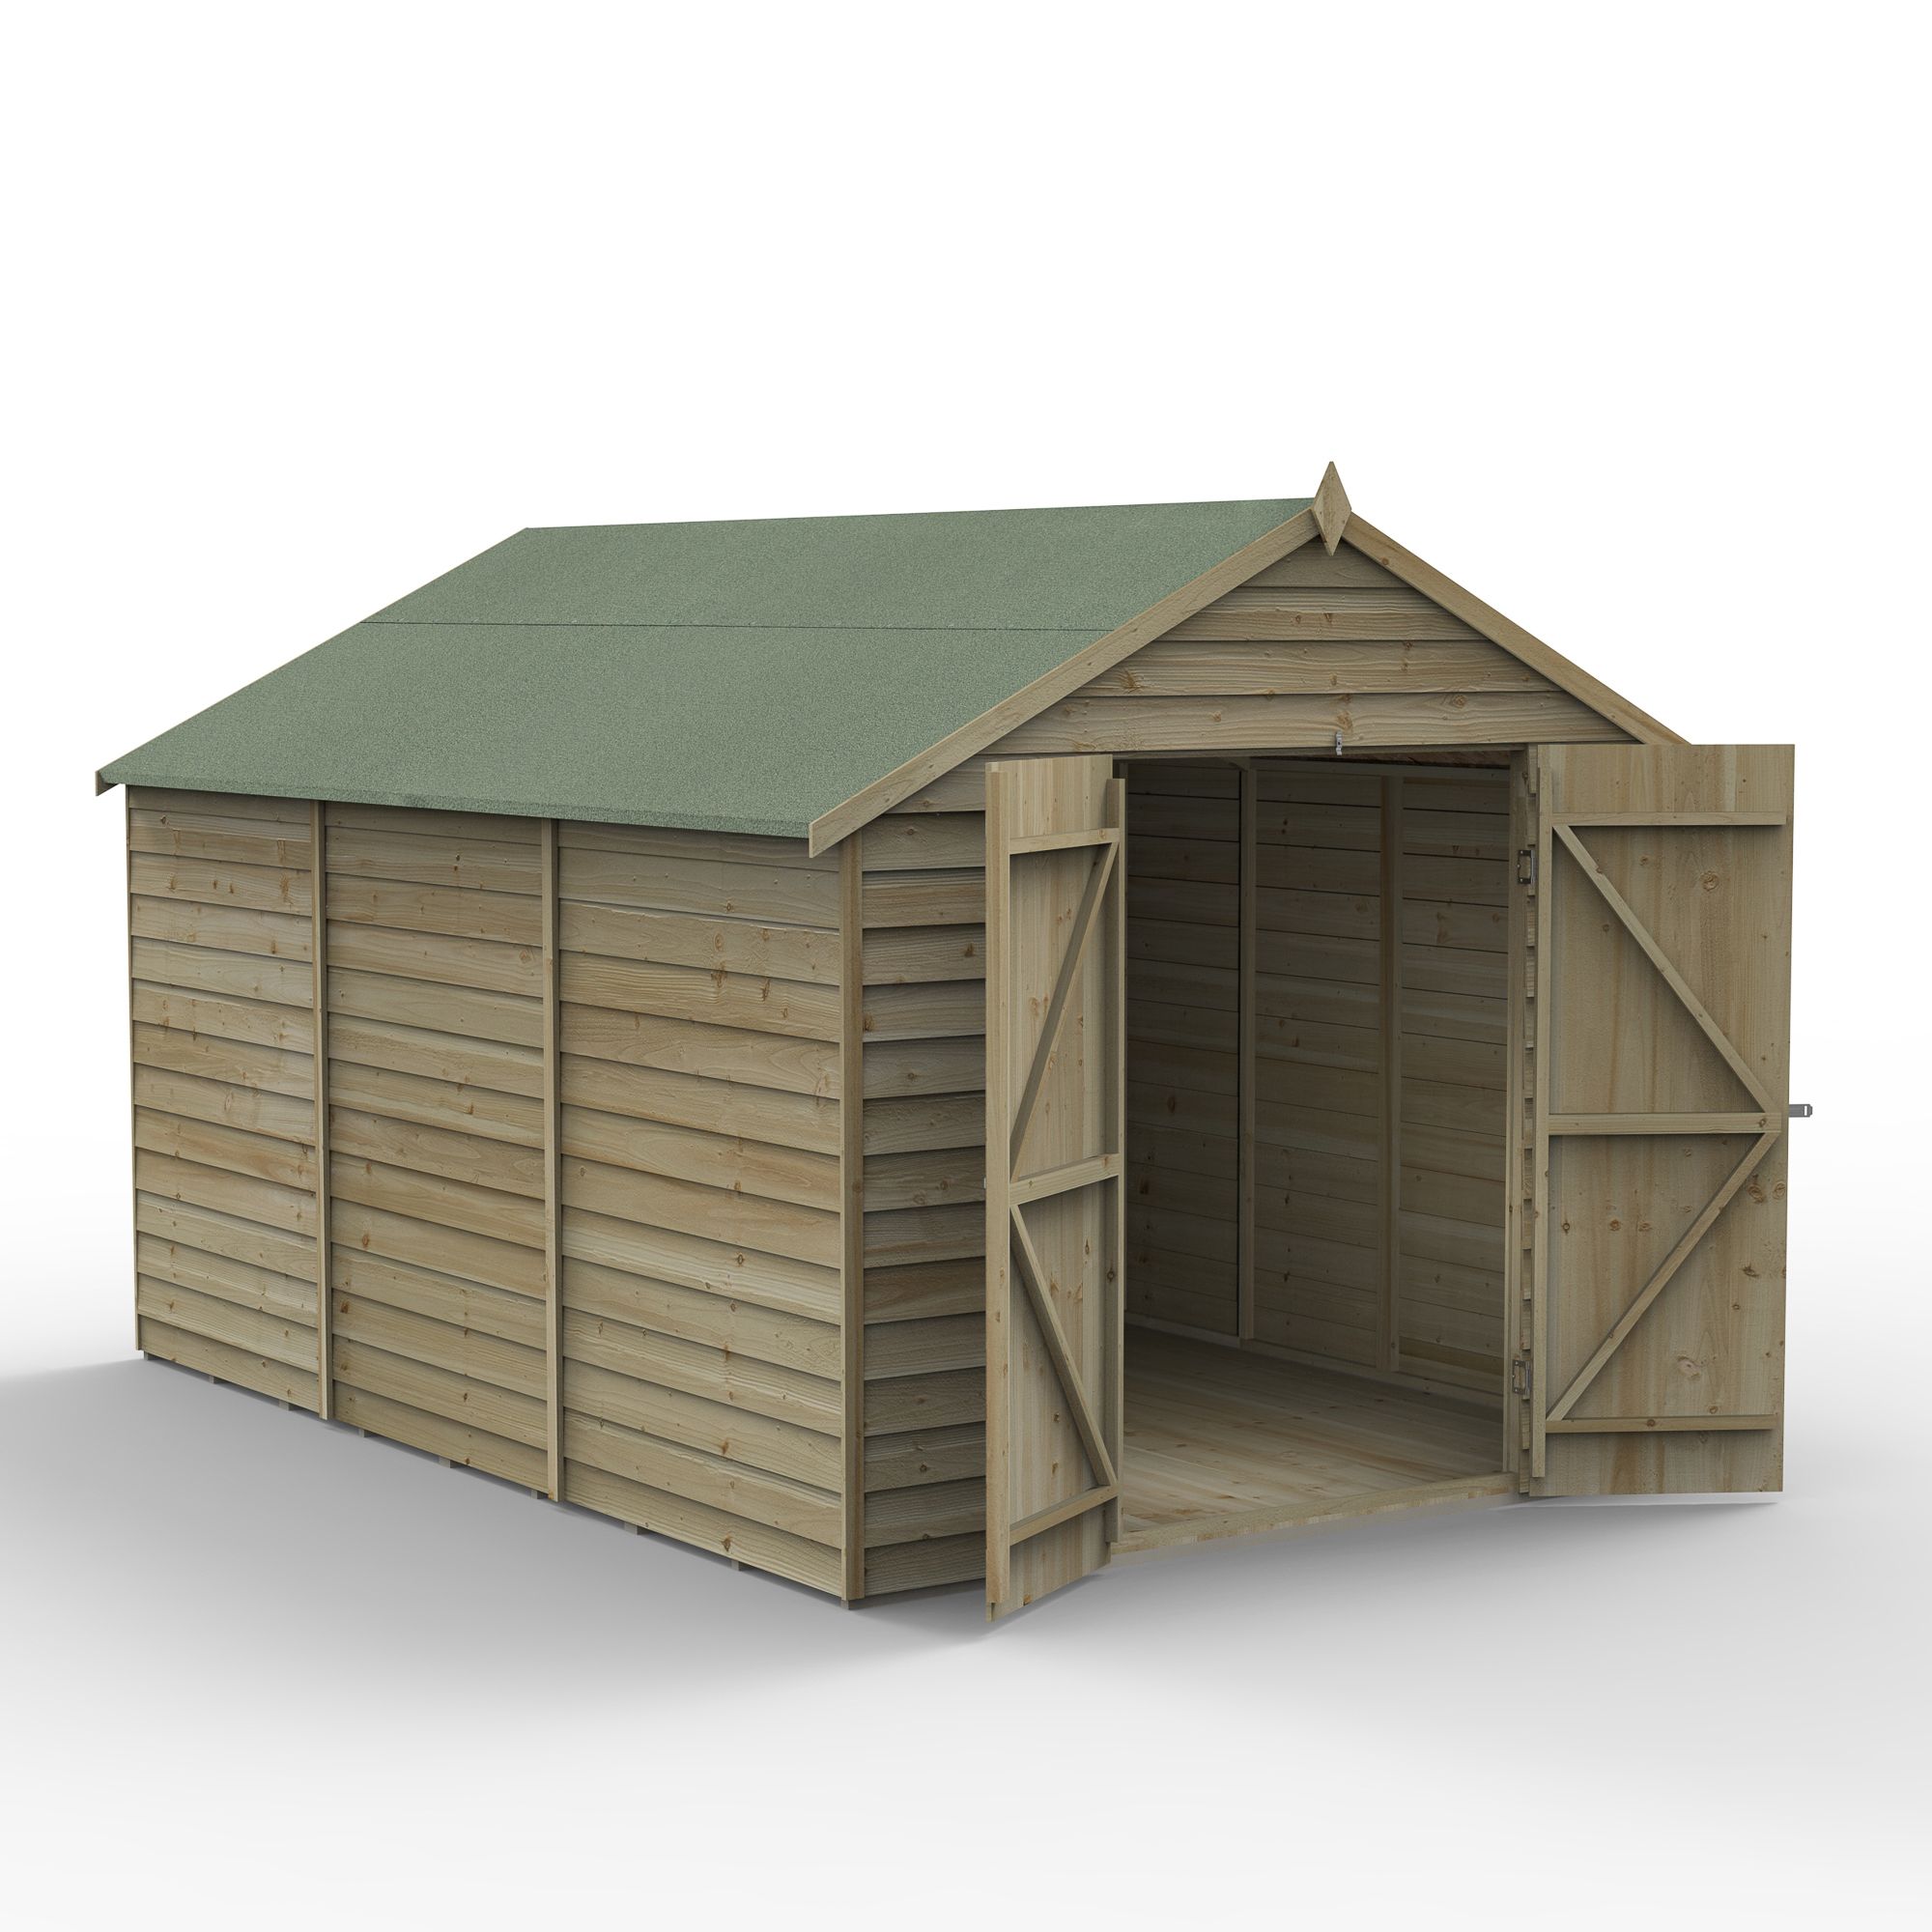 Forest Garden Overlap 12x8 ft Apex Wooden 2 door Shed with floor (Base included) - Assembly service included